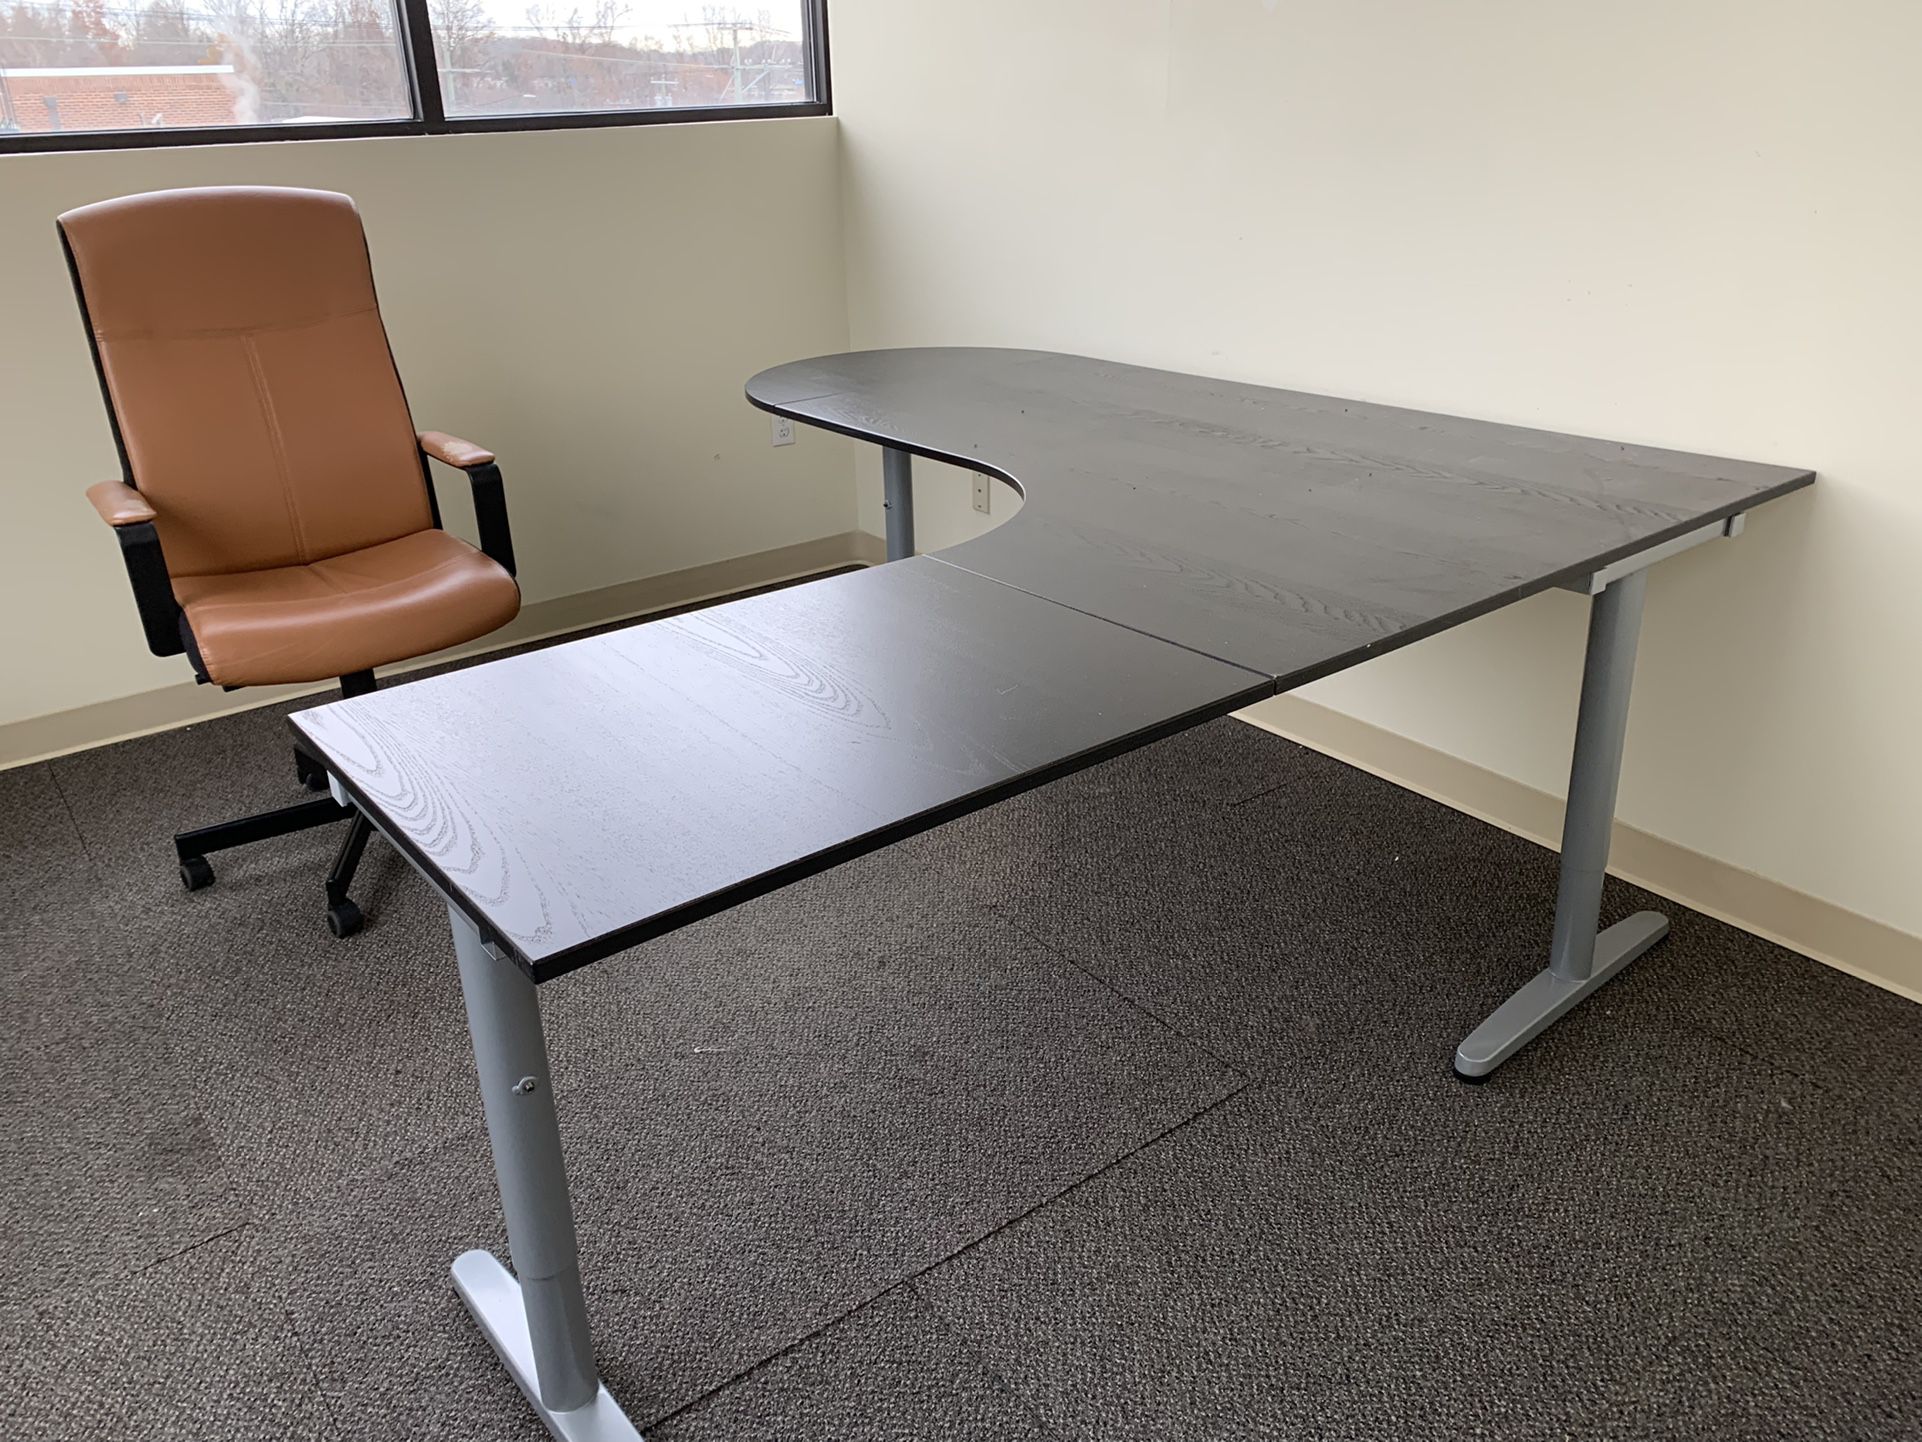 Desk and chair for your business or home